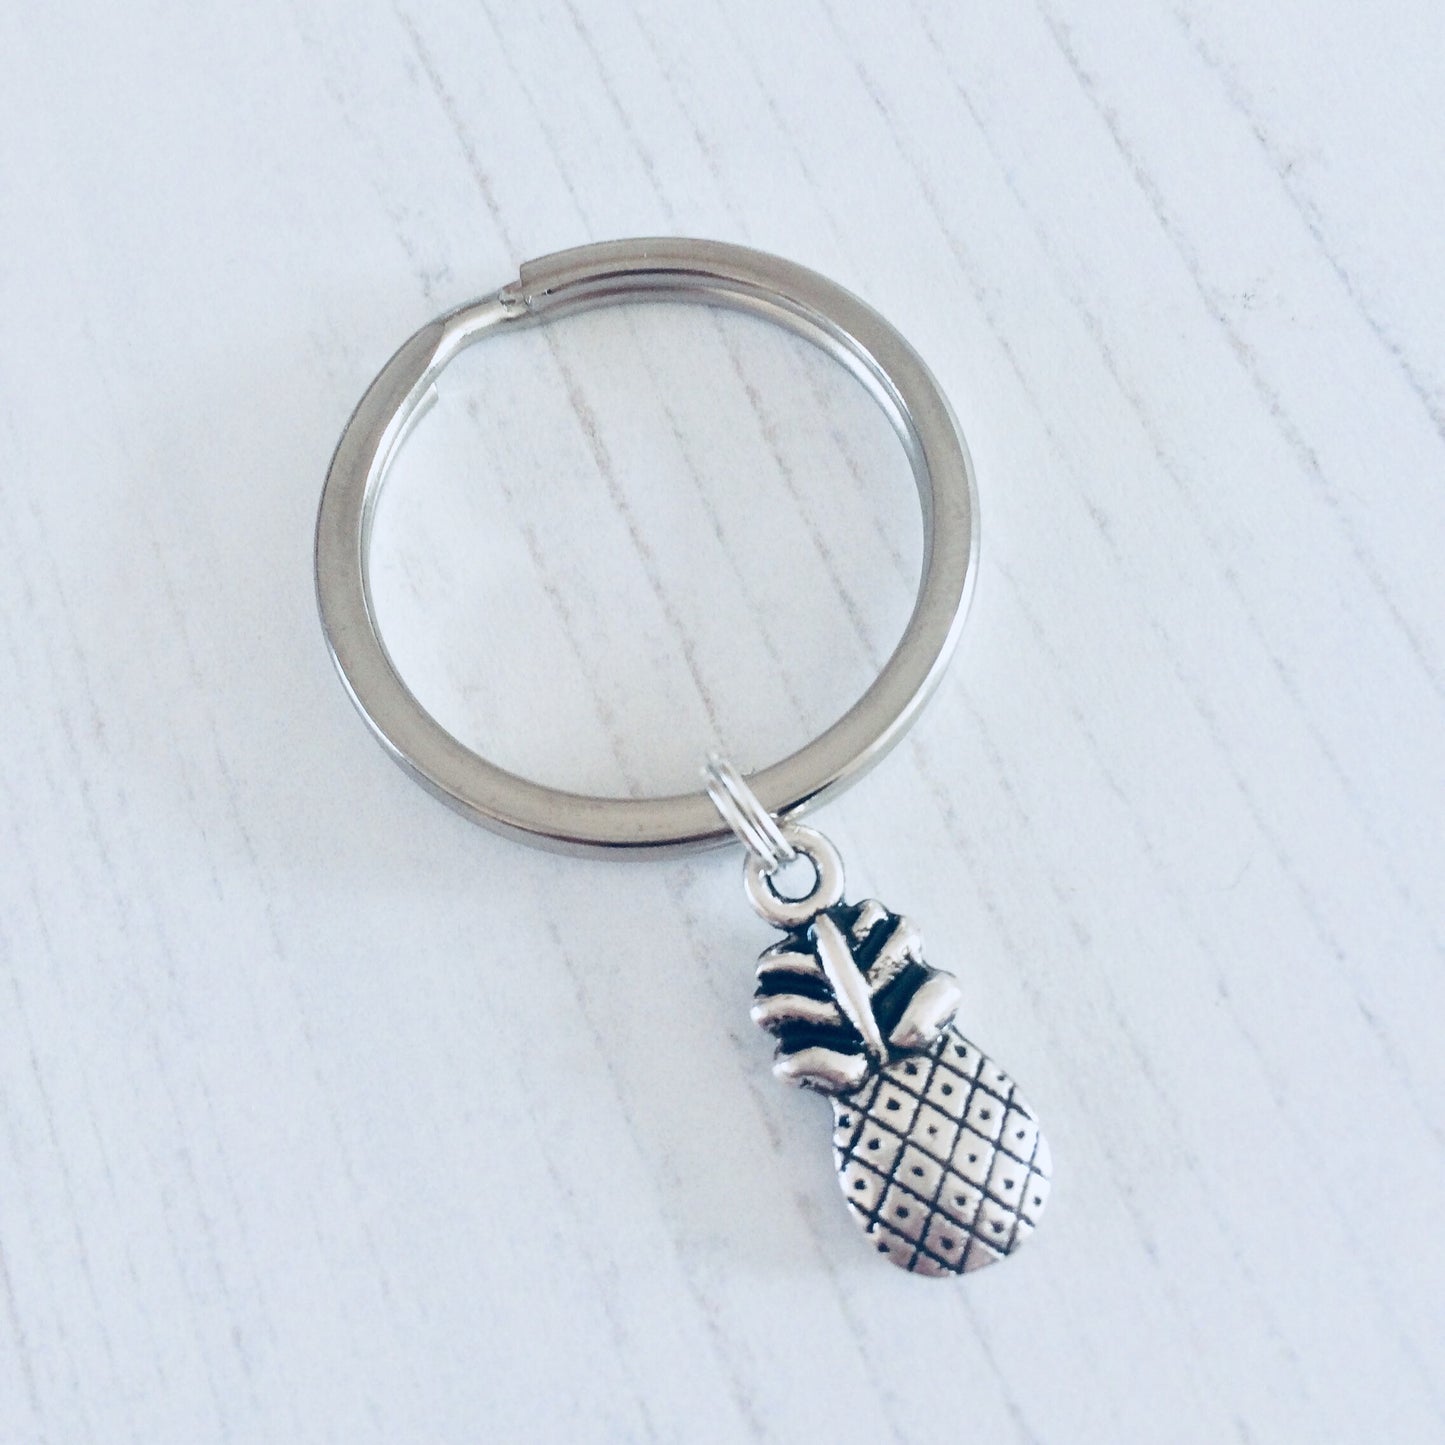 Pineapple Keychain, Exotic Fruit Gifts, Fruit Keyring, Tropical Bag Charm, Vacation Keychain, Cute Keyring Gift, Pineapple Lover Gifts.